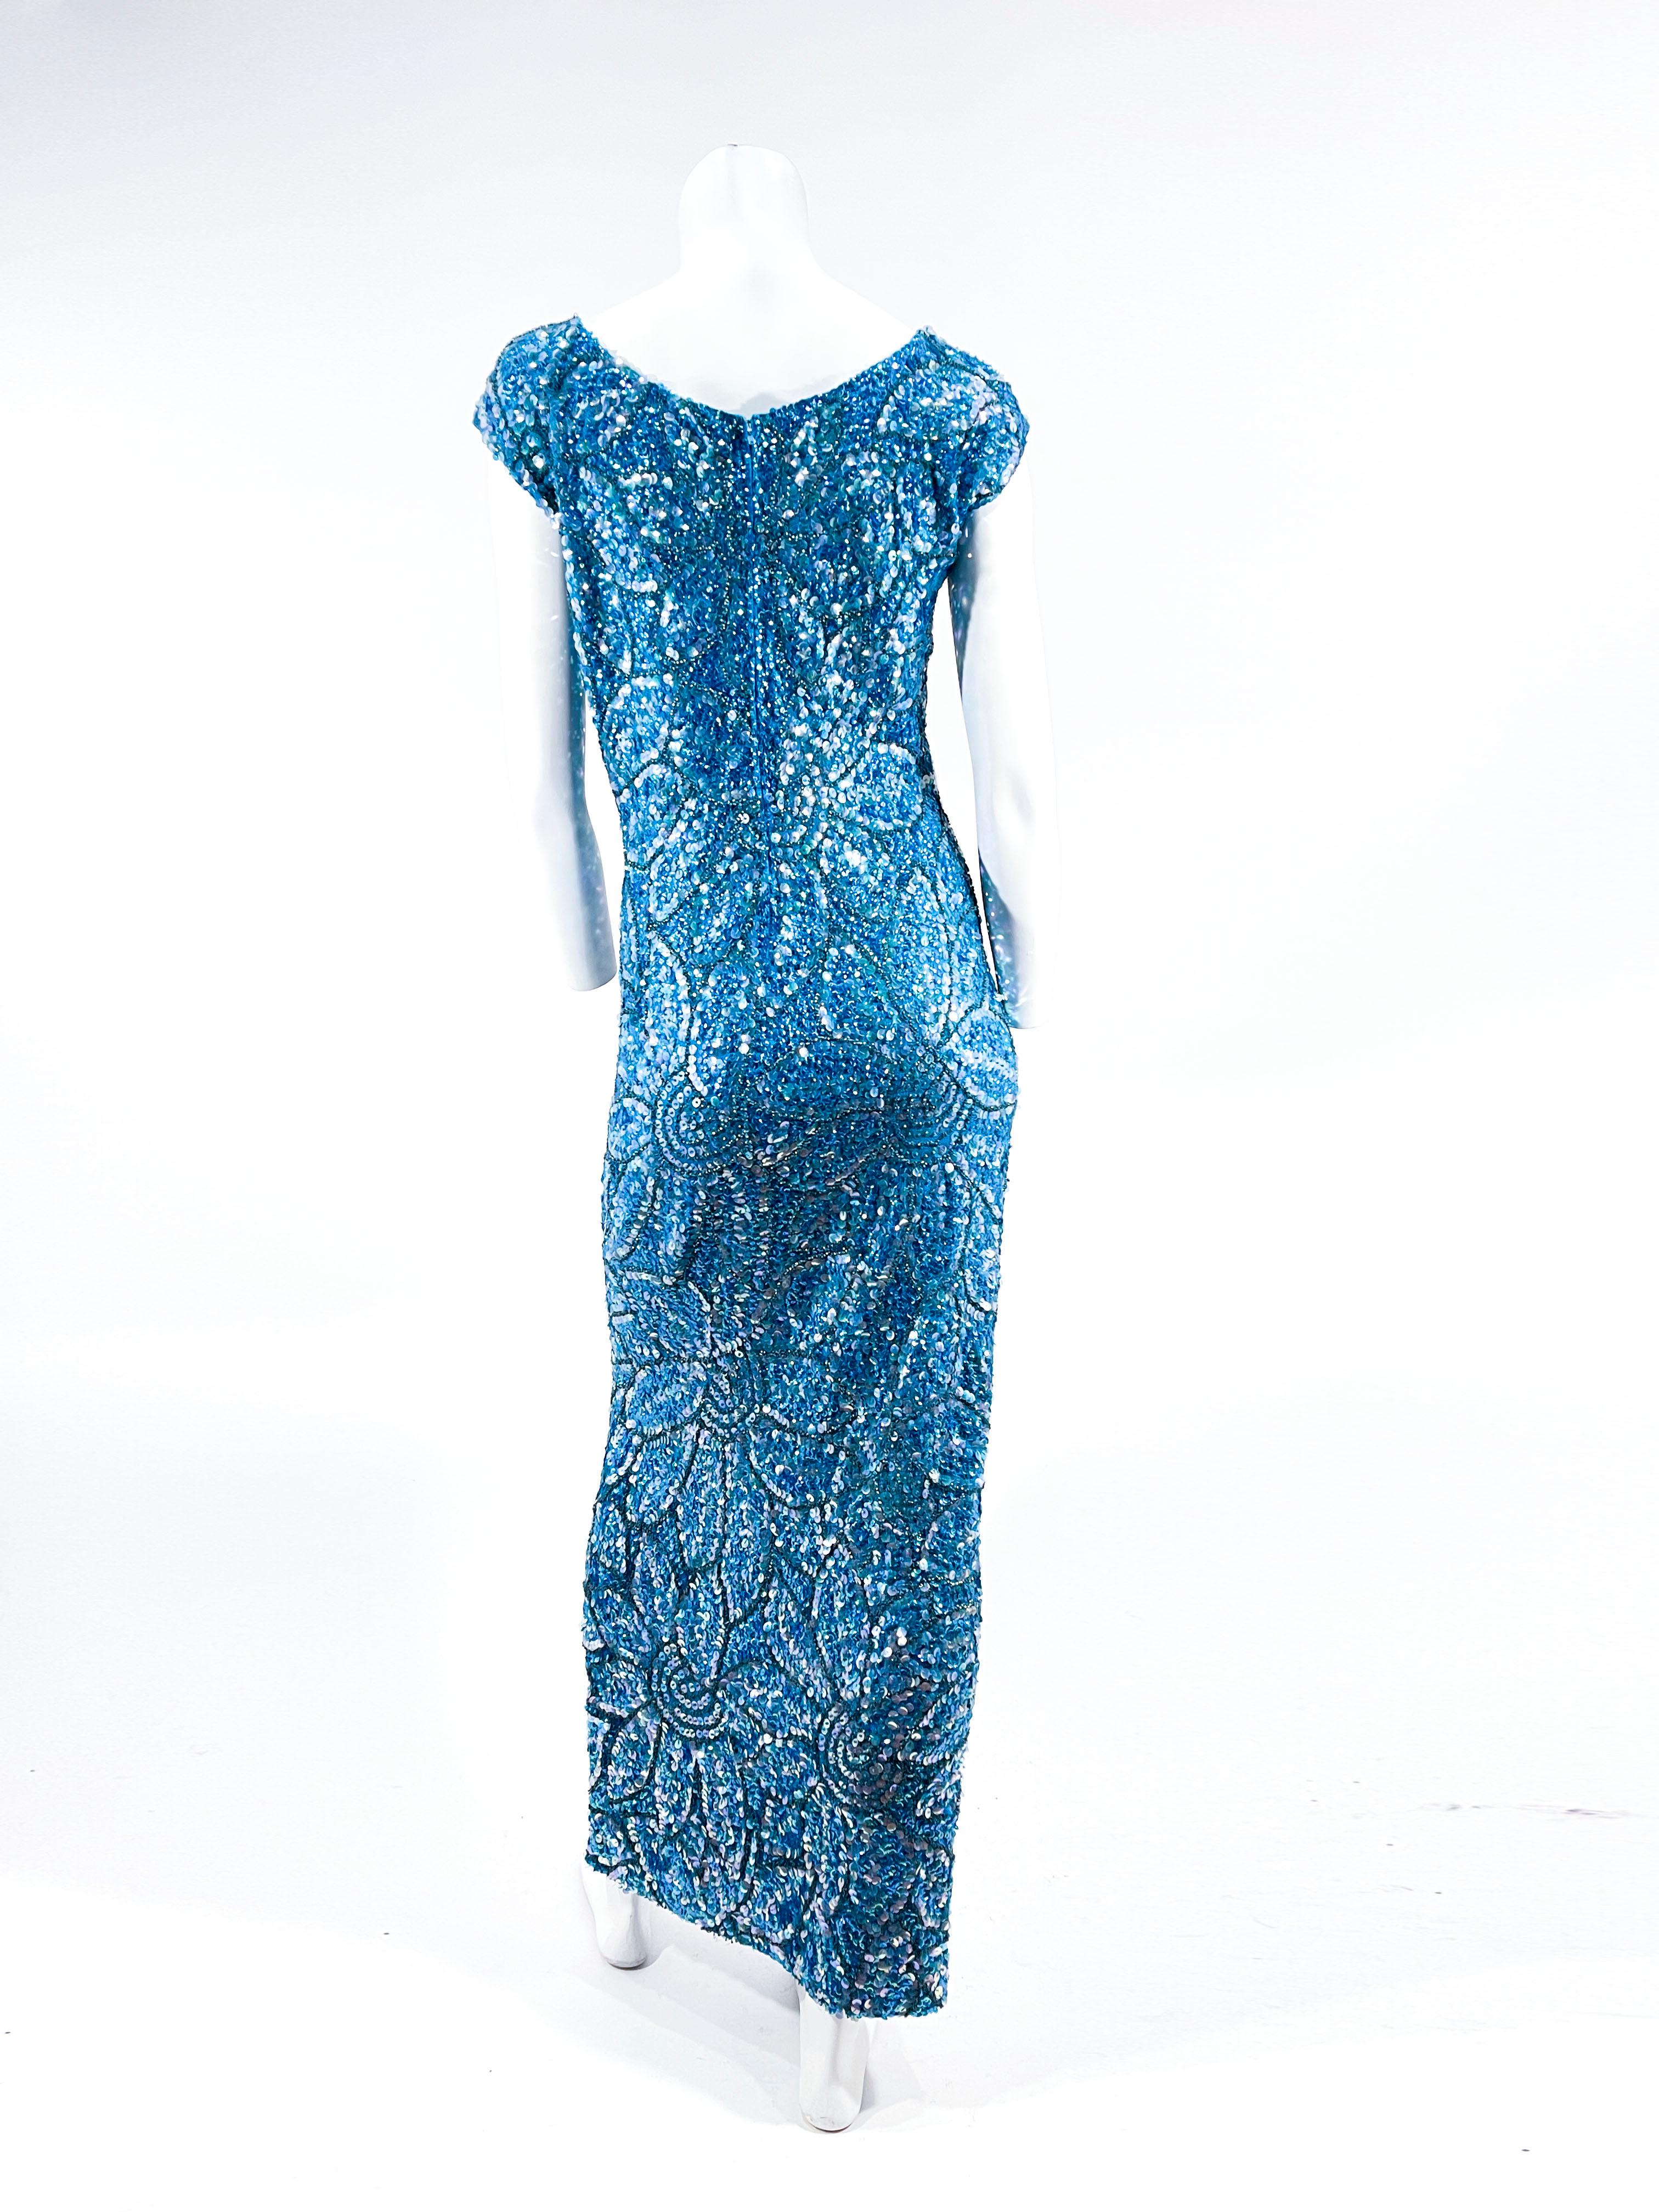 1950s Imperial Aqua Blue Sequin and Beaded Knit Dress For Sale 2